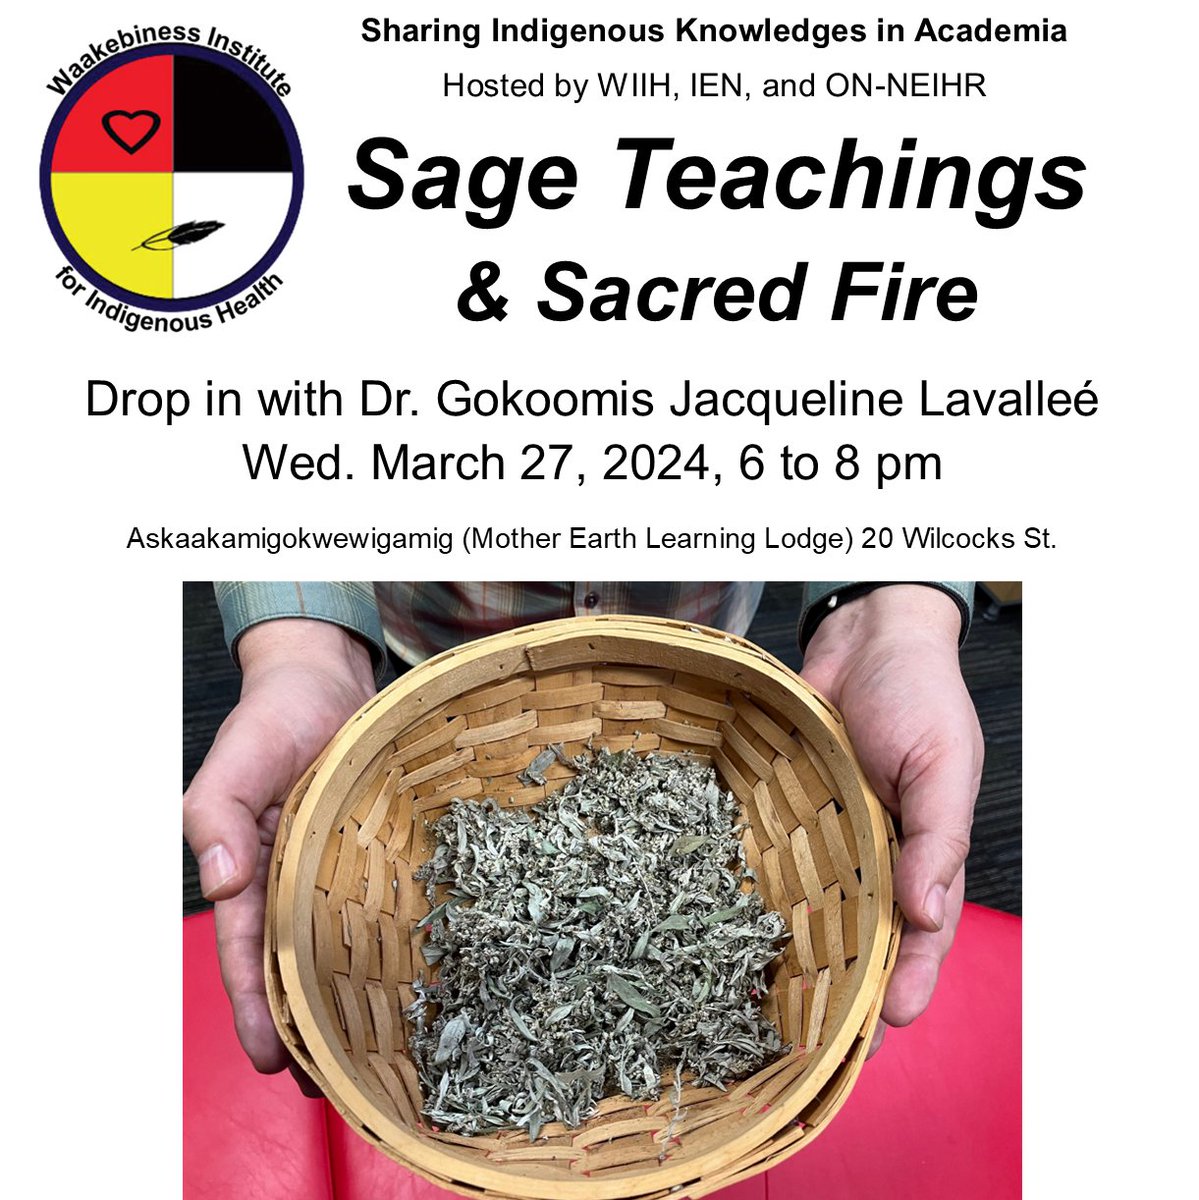 Tomorrow night (Wednesday) at the Drop-in Sacred Fire Ceremony, Dr. Gokoomis Jacqueline Lavallee will share teachings of the sacred medicine, sage. Join us at the Askaakamigokwewigamig (Mother Earth Learning Lodge) 20 Wilcocks St., Toronto, from 6 to 8 pm.eventbrite.ca/e/drop-in-cere…